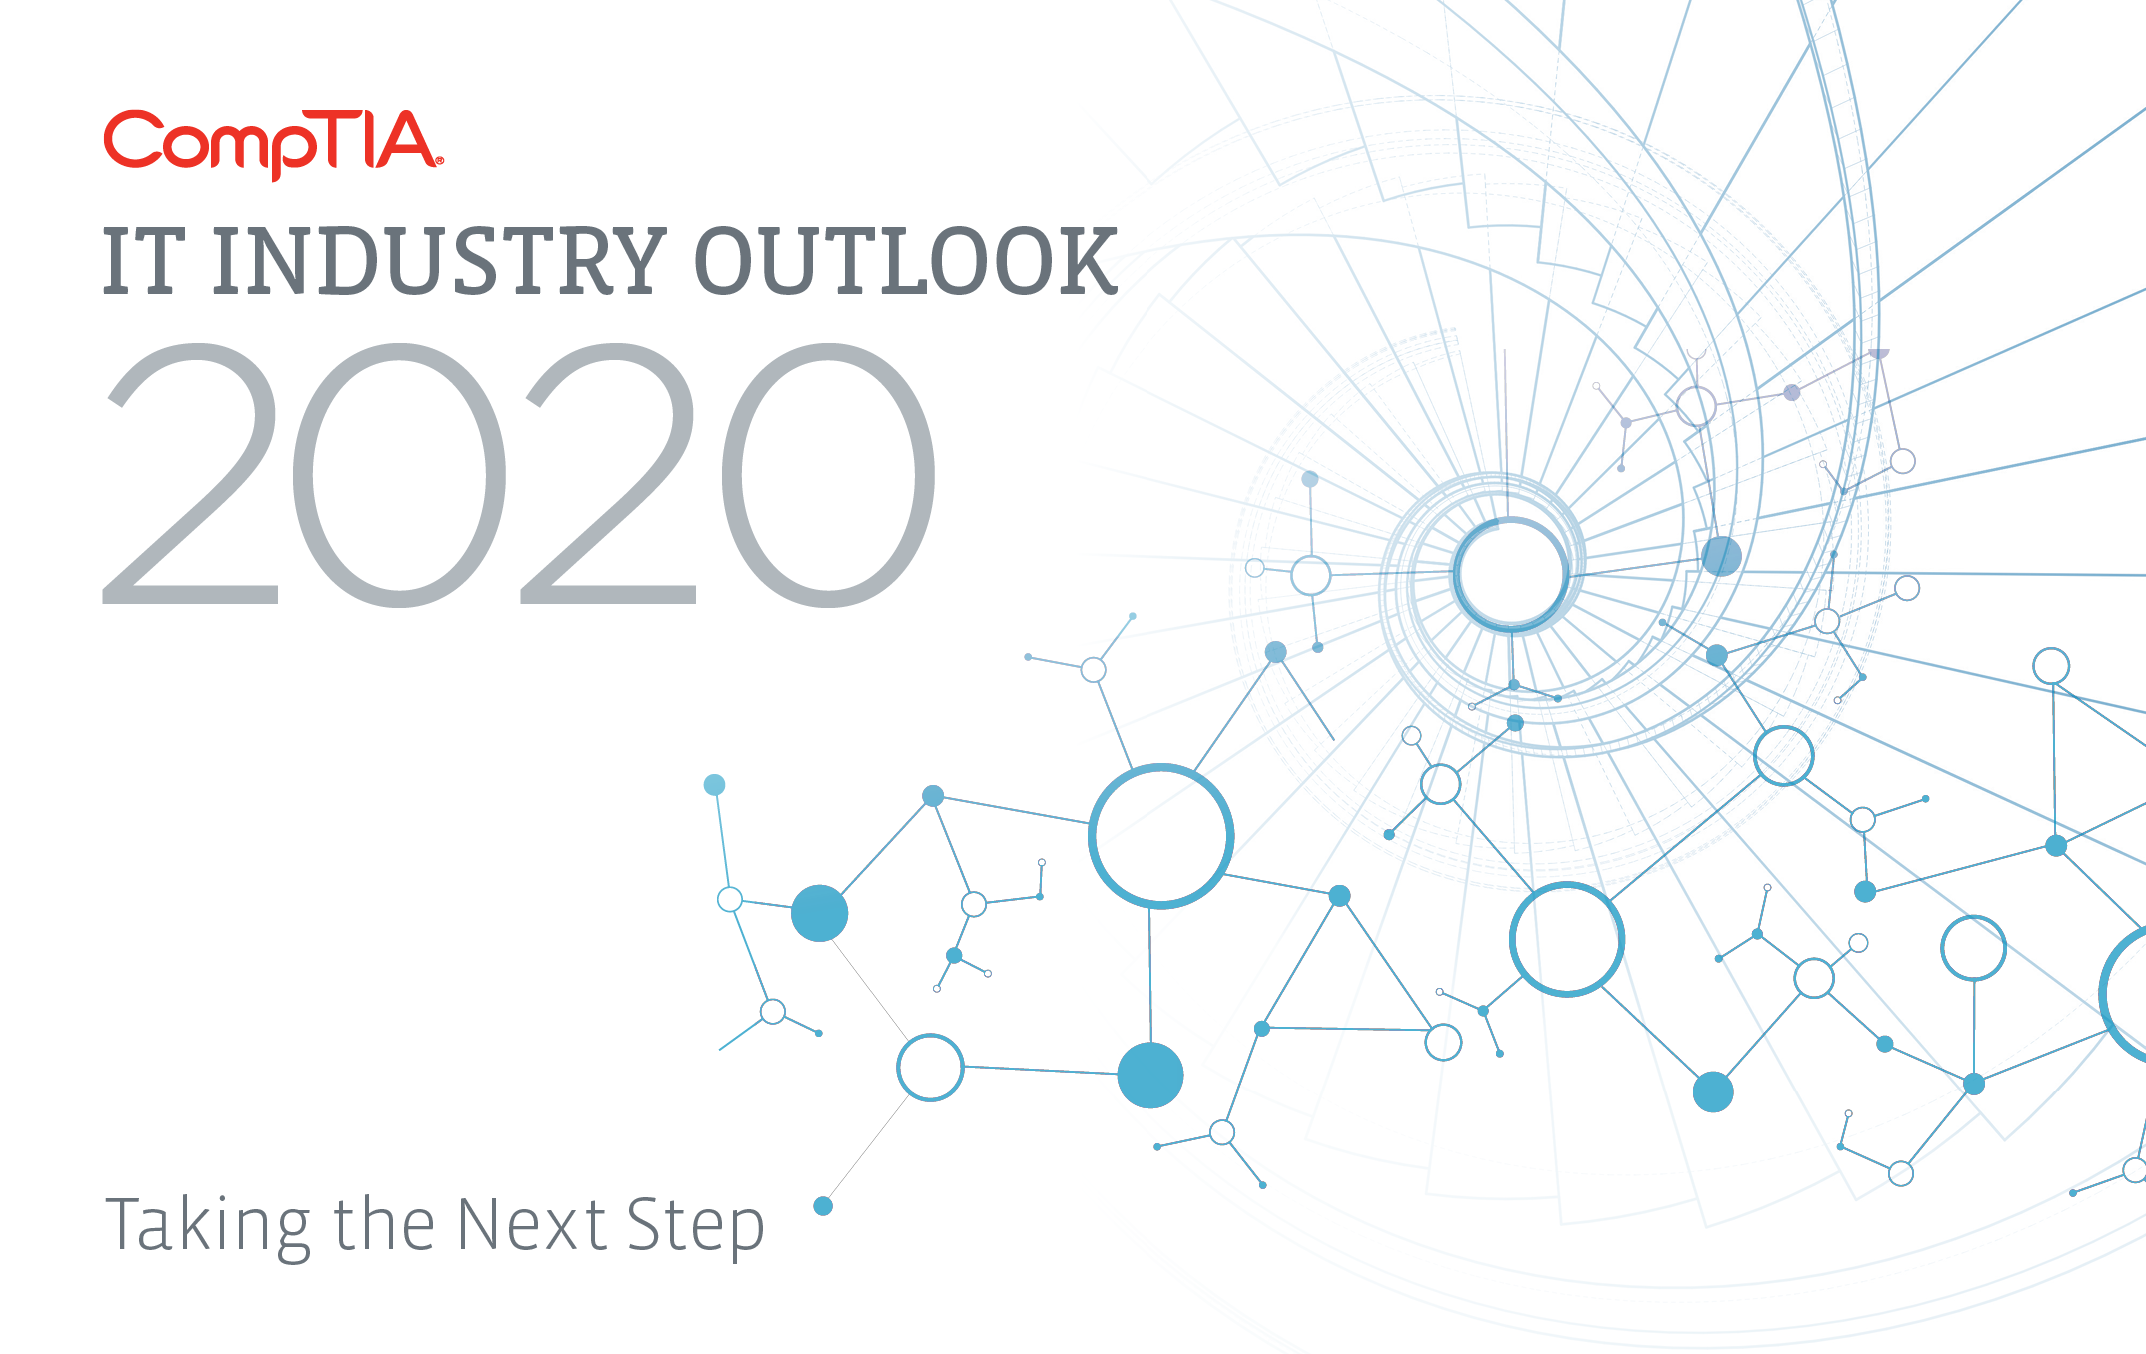 An abstract image of a spiral staircase with the words CompTIA IT Industry Outlook 2020